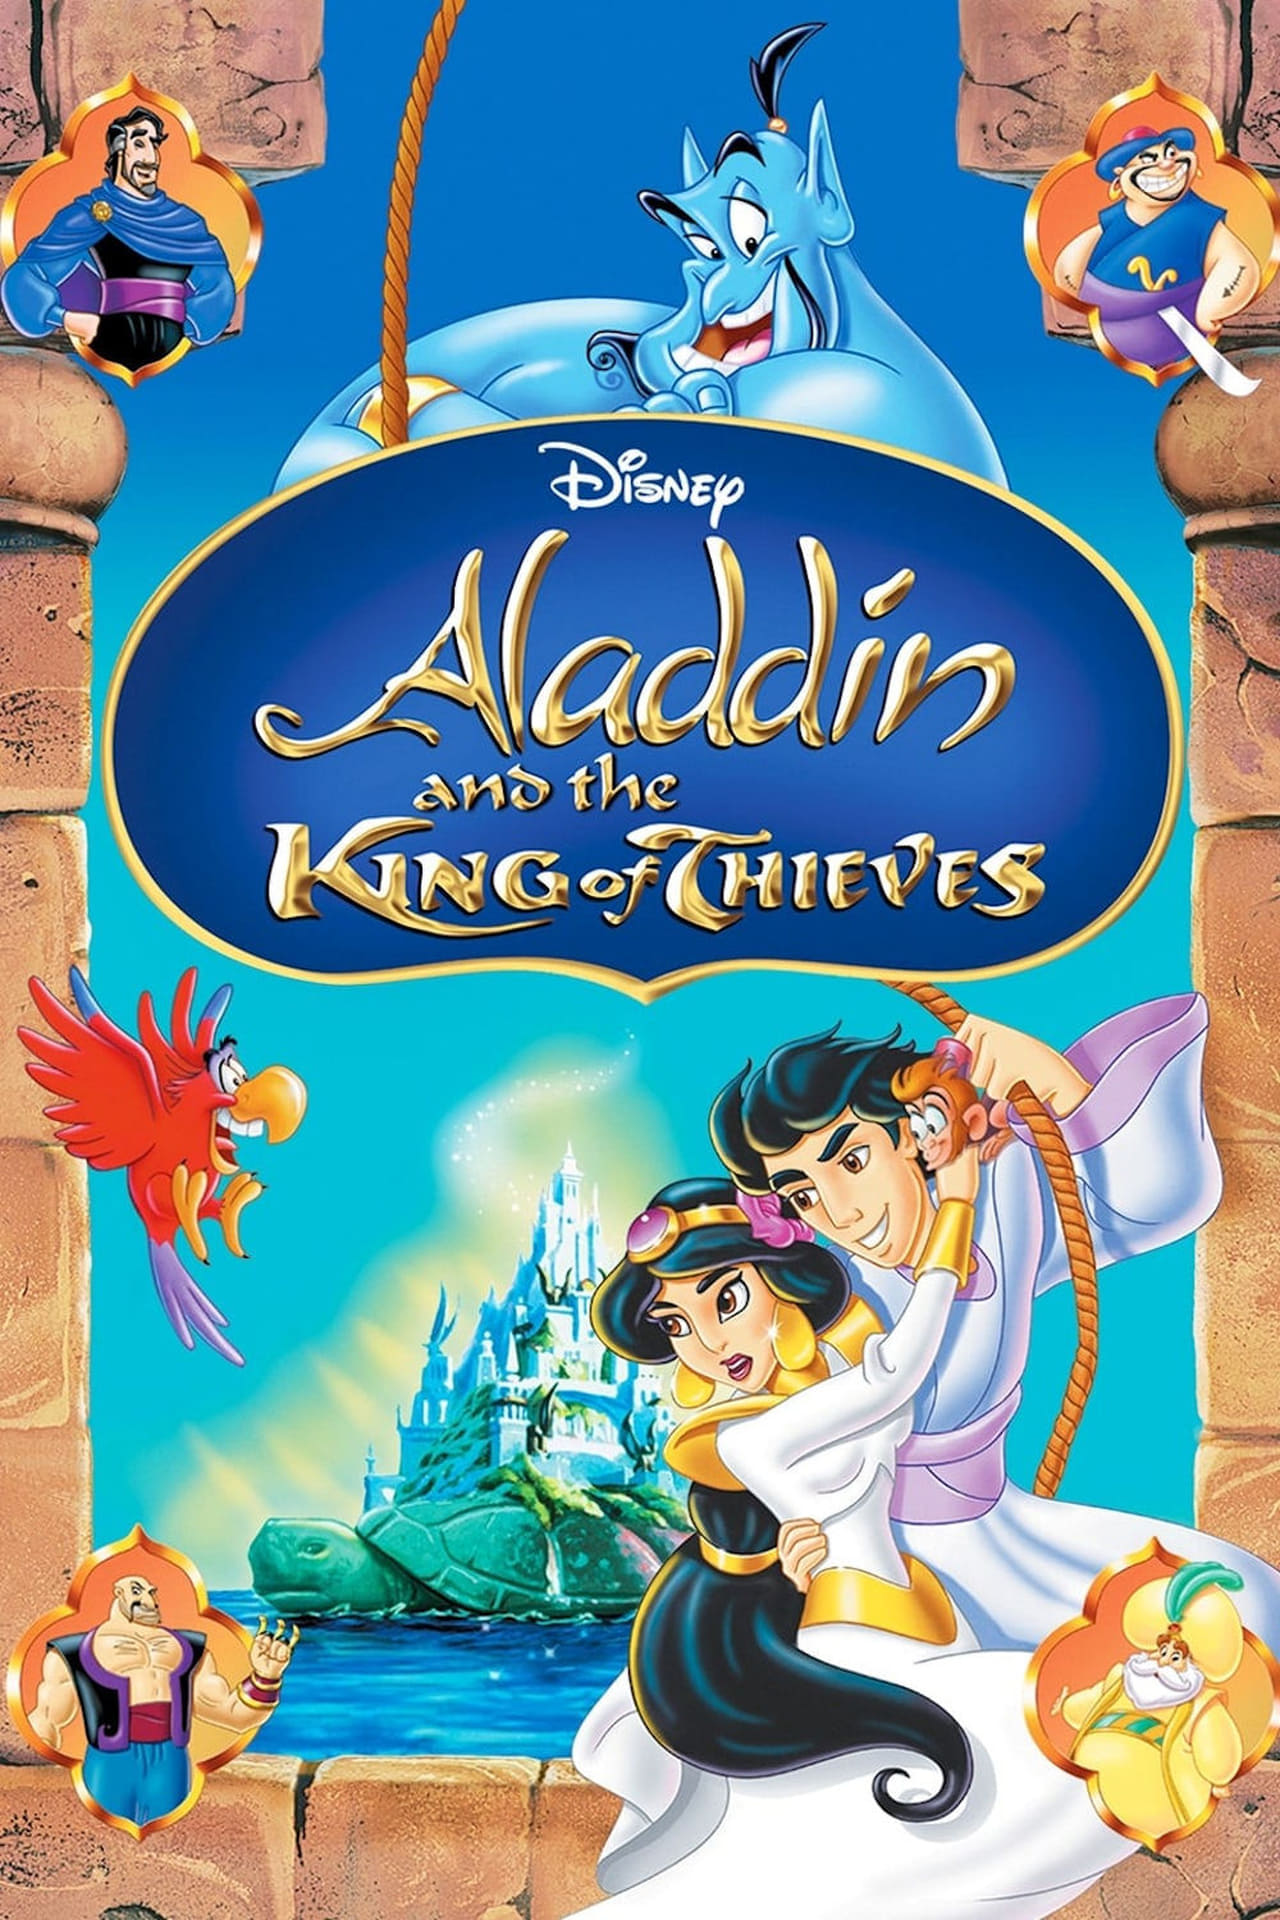 EN - Aladdin And The King Of Thieves (1996) ALADDIN COLLECTION